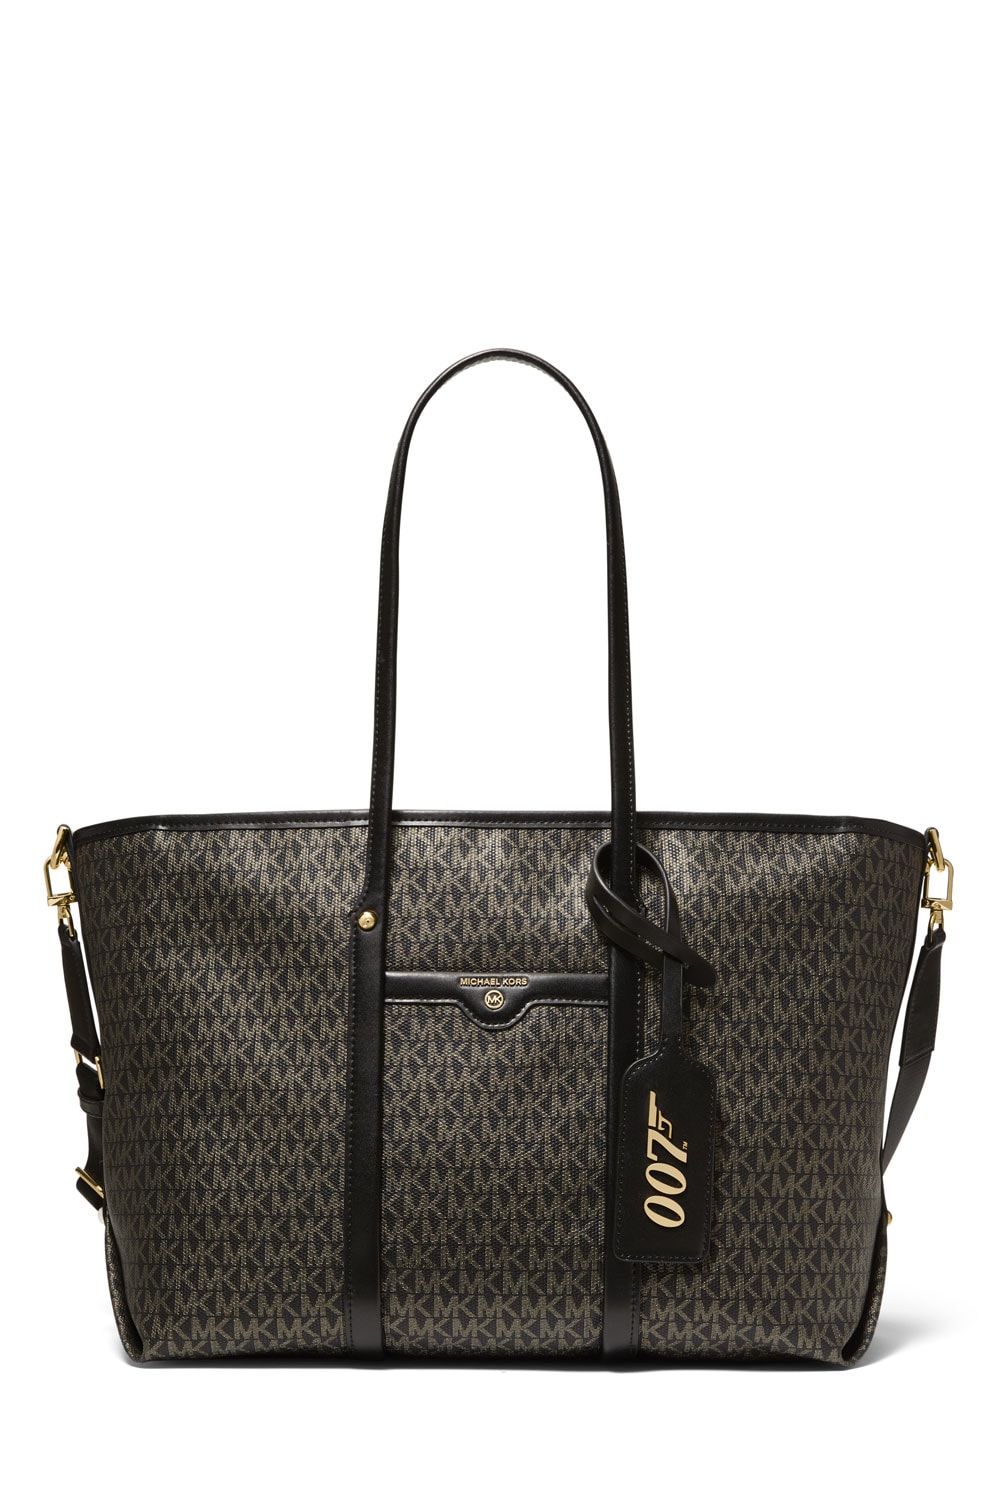 michael michael kors 007 bond exclusive limited edition capsule collection cindy bruna bella hadid luggage handbags swimwear footwear ready-to-wear pieces bond signature print suitcase beck weekender bag